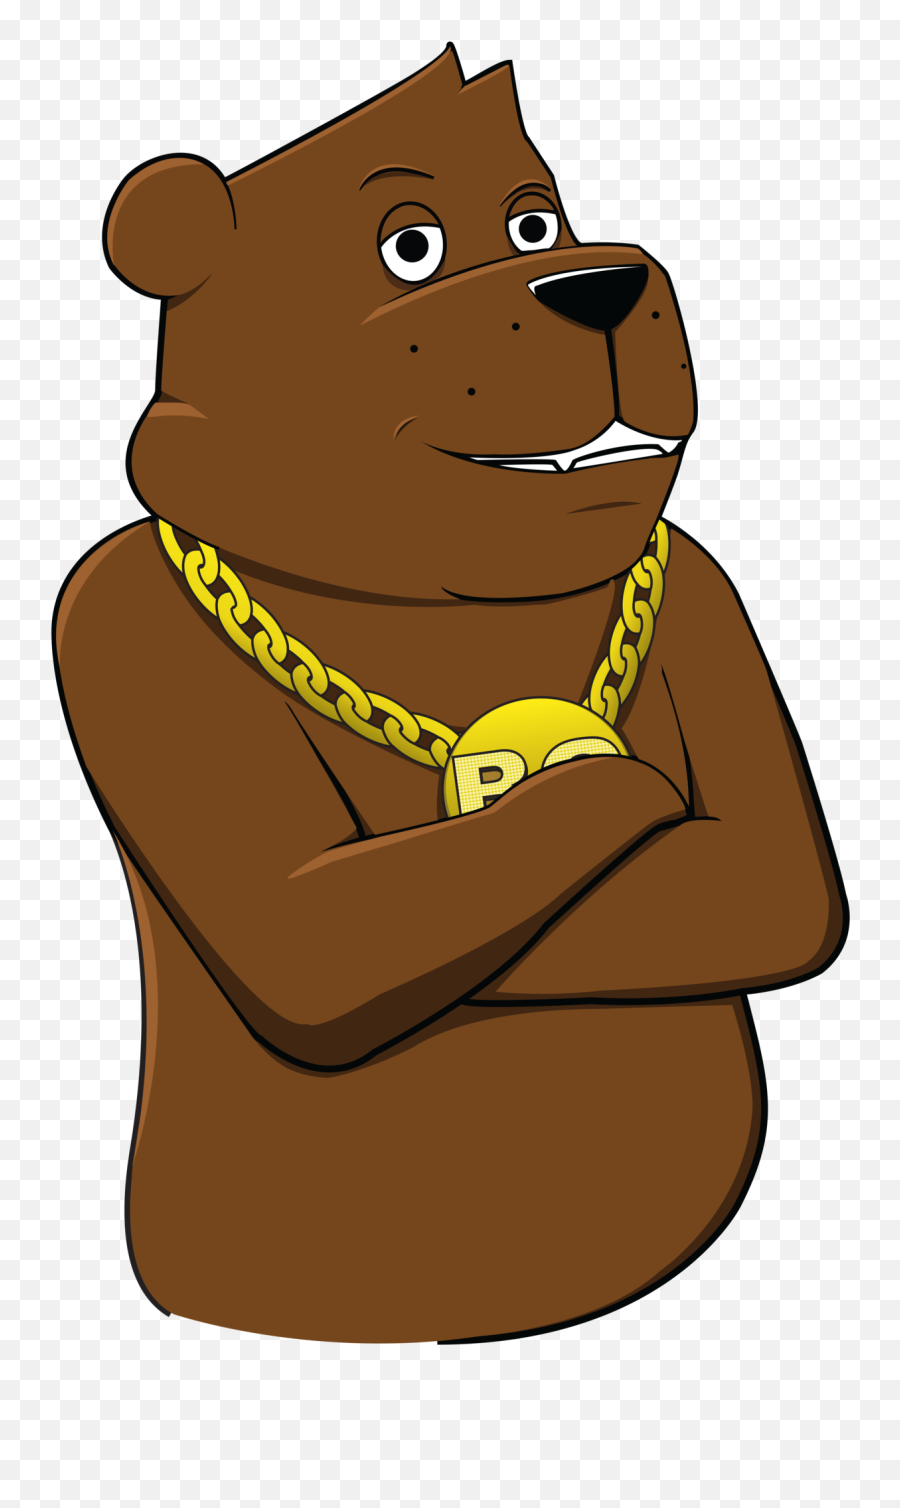 Ticketfly - Bear Grillz Png,Grillz Png